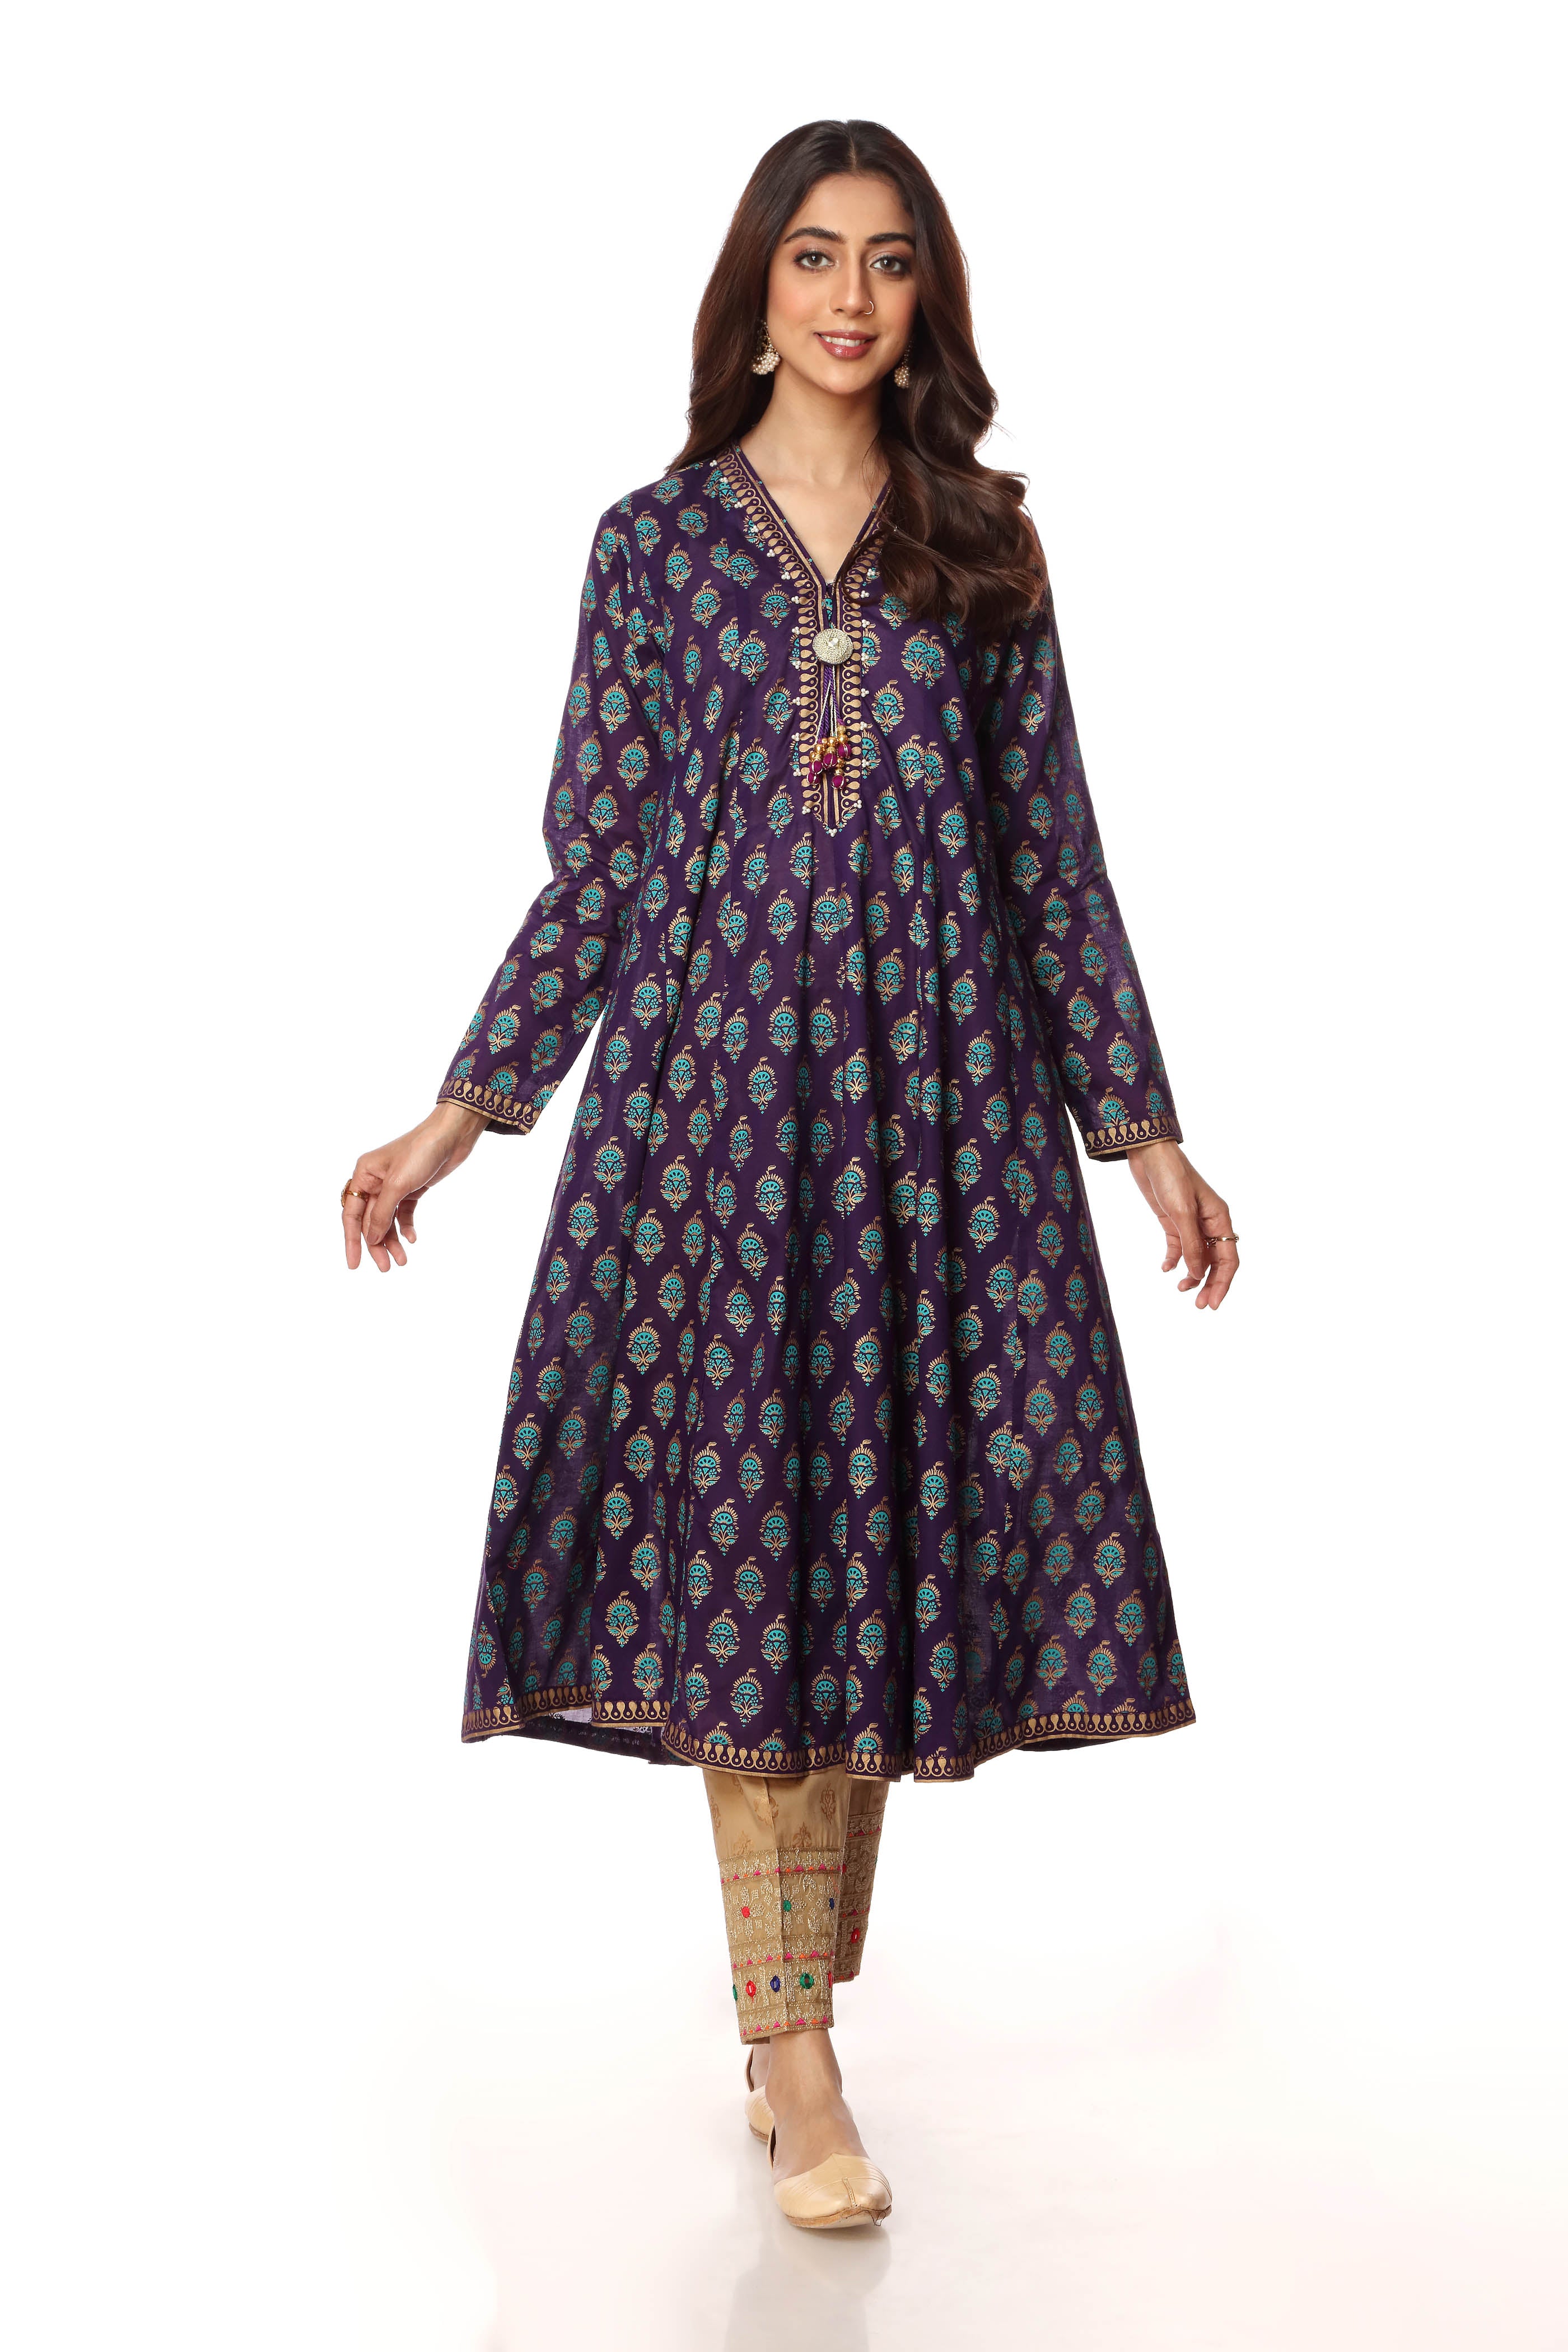 Peacock Frock in Purple coloured Printed Lawn fabric